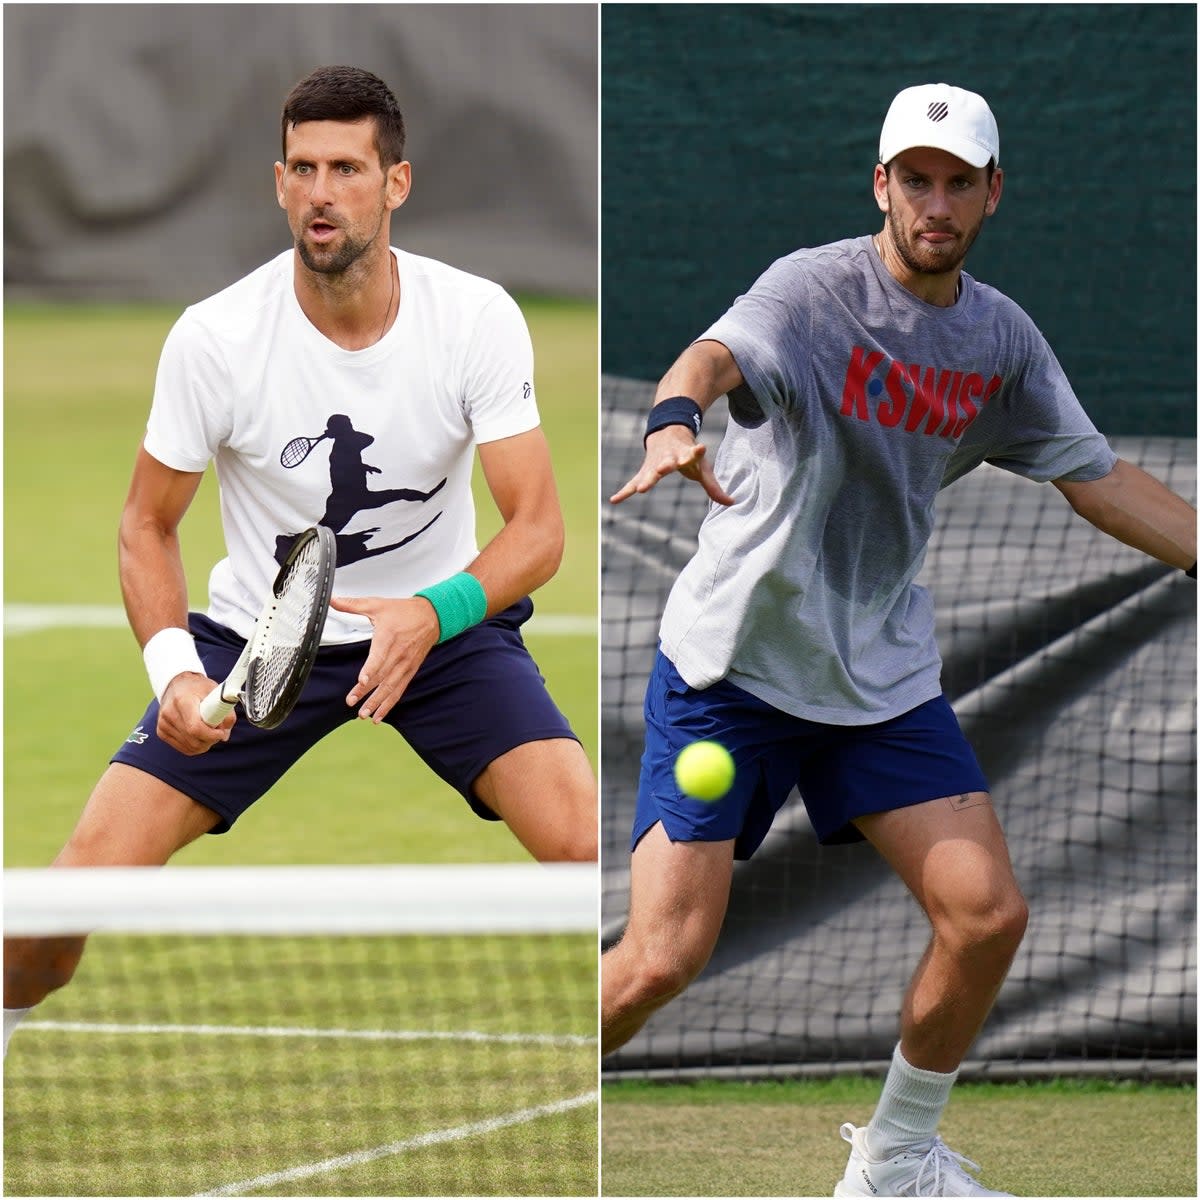 Novak Djokovic and Cameron Norrie will battle it out on Centre Court for a place in the Wimbledon final (Adam Davy/PA)